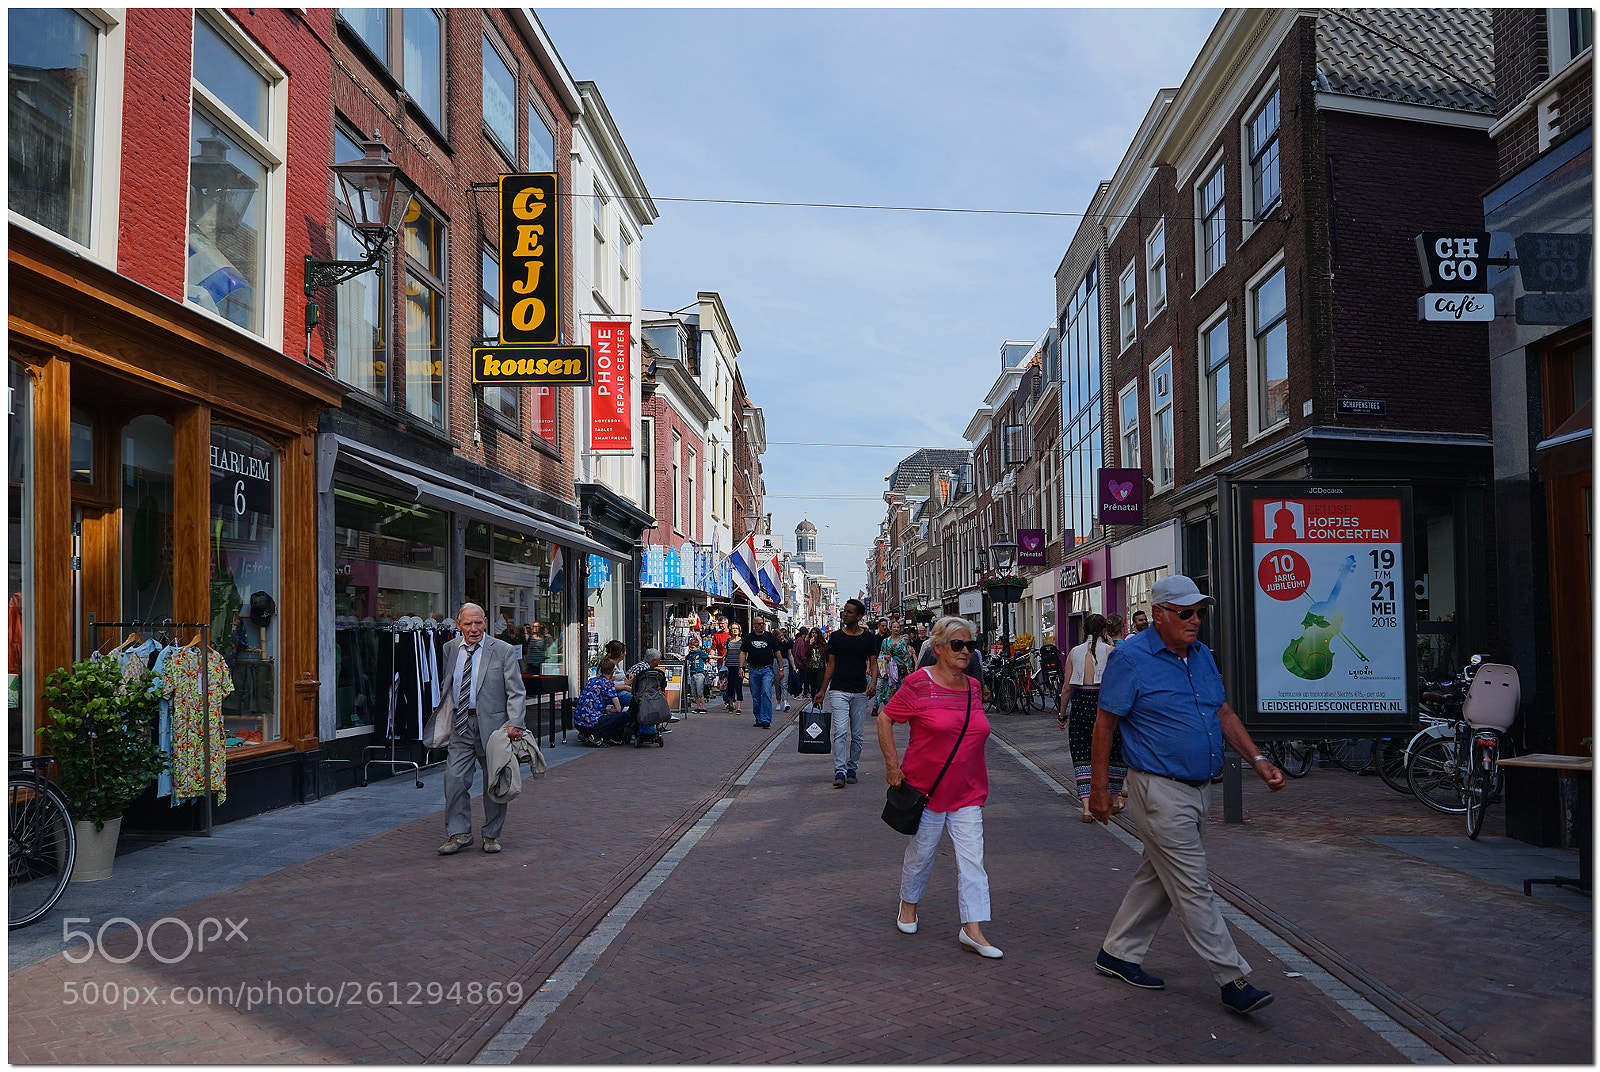 Sony a7 sample photo. Shopping in leiden, the photography